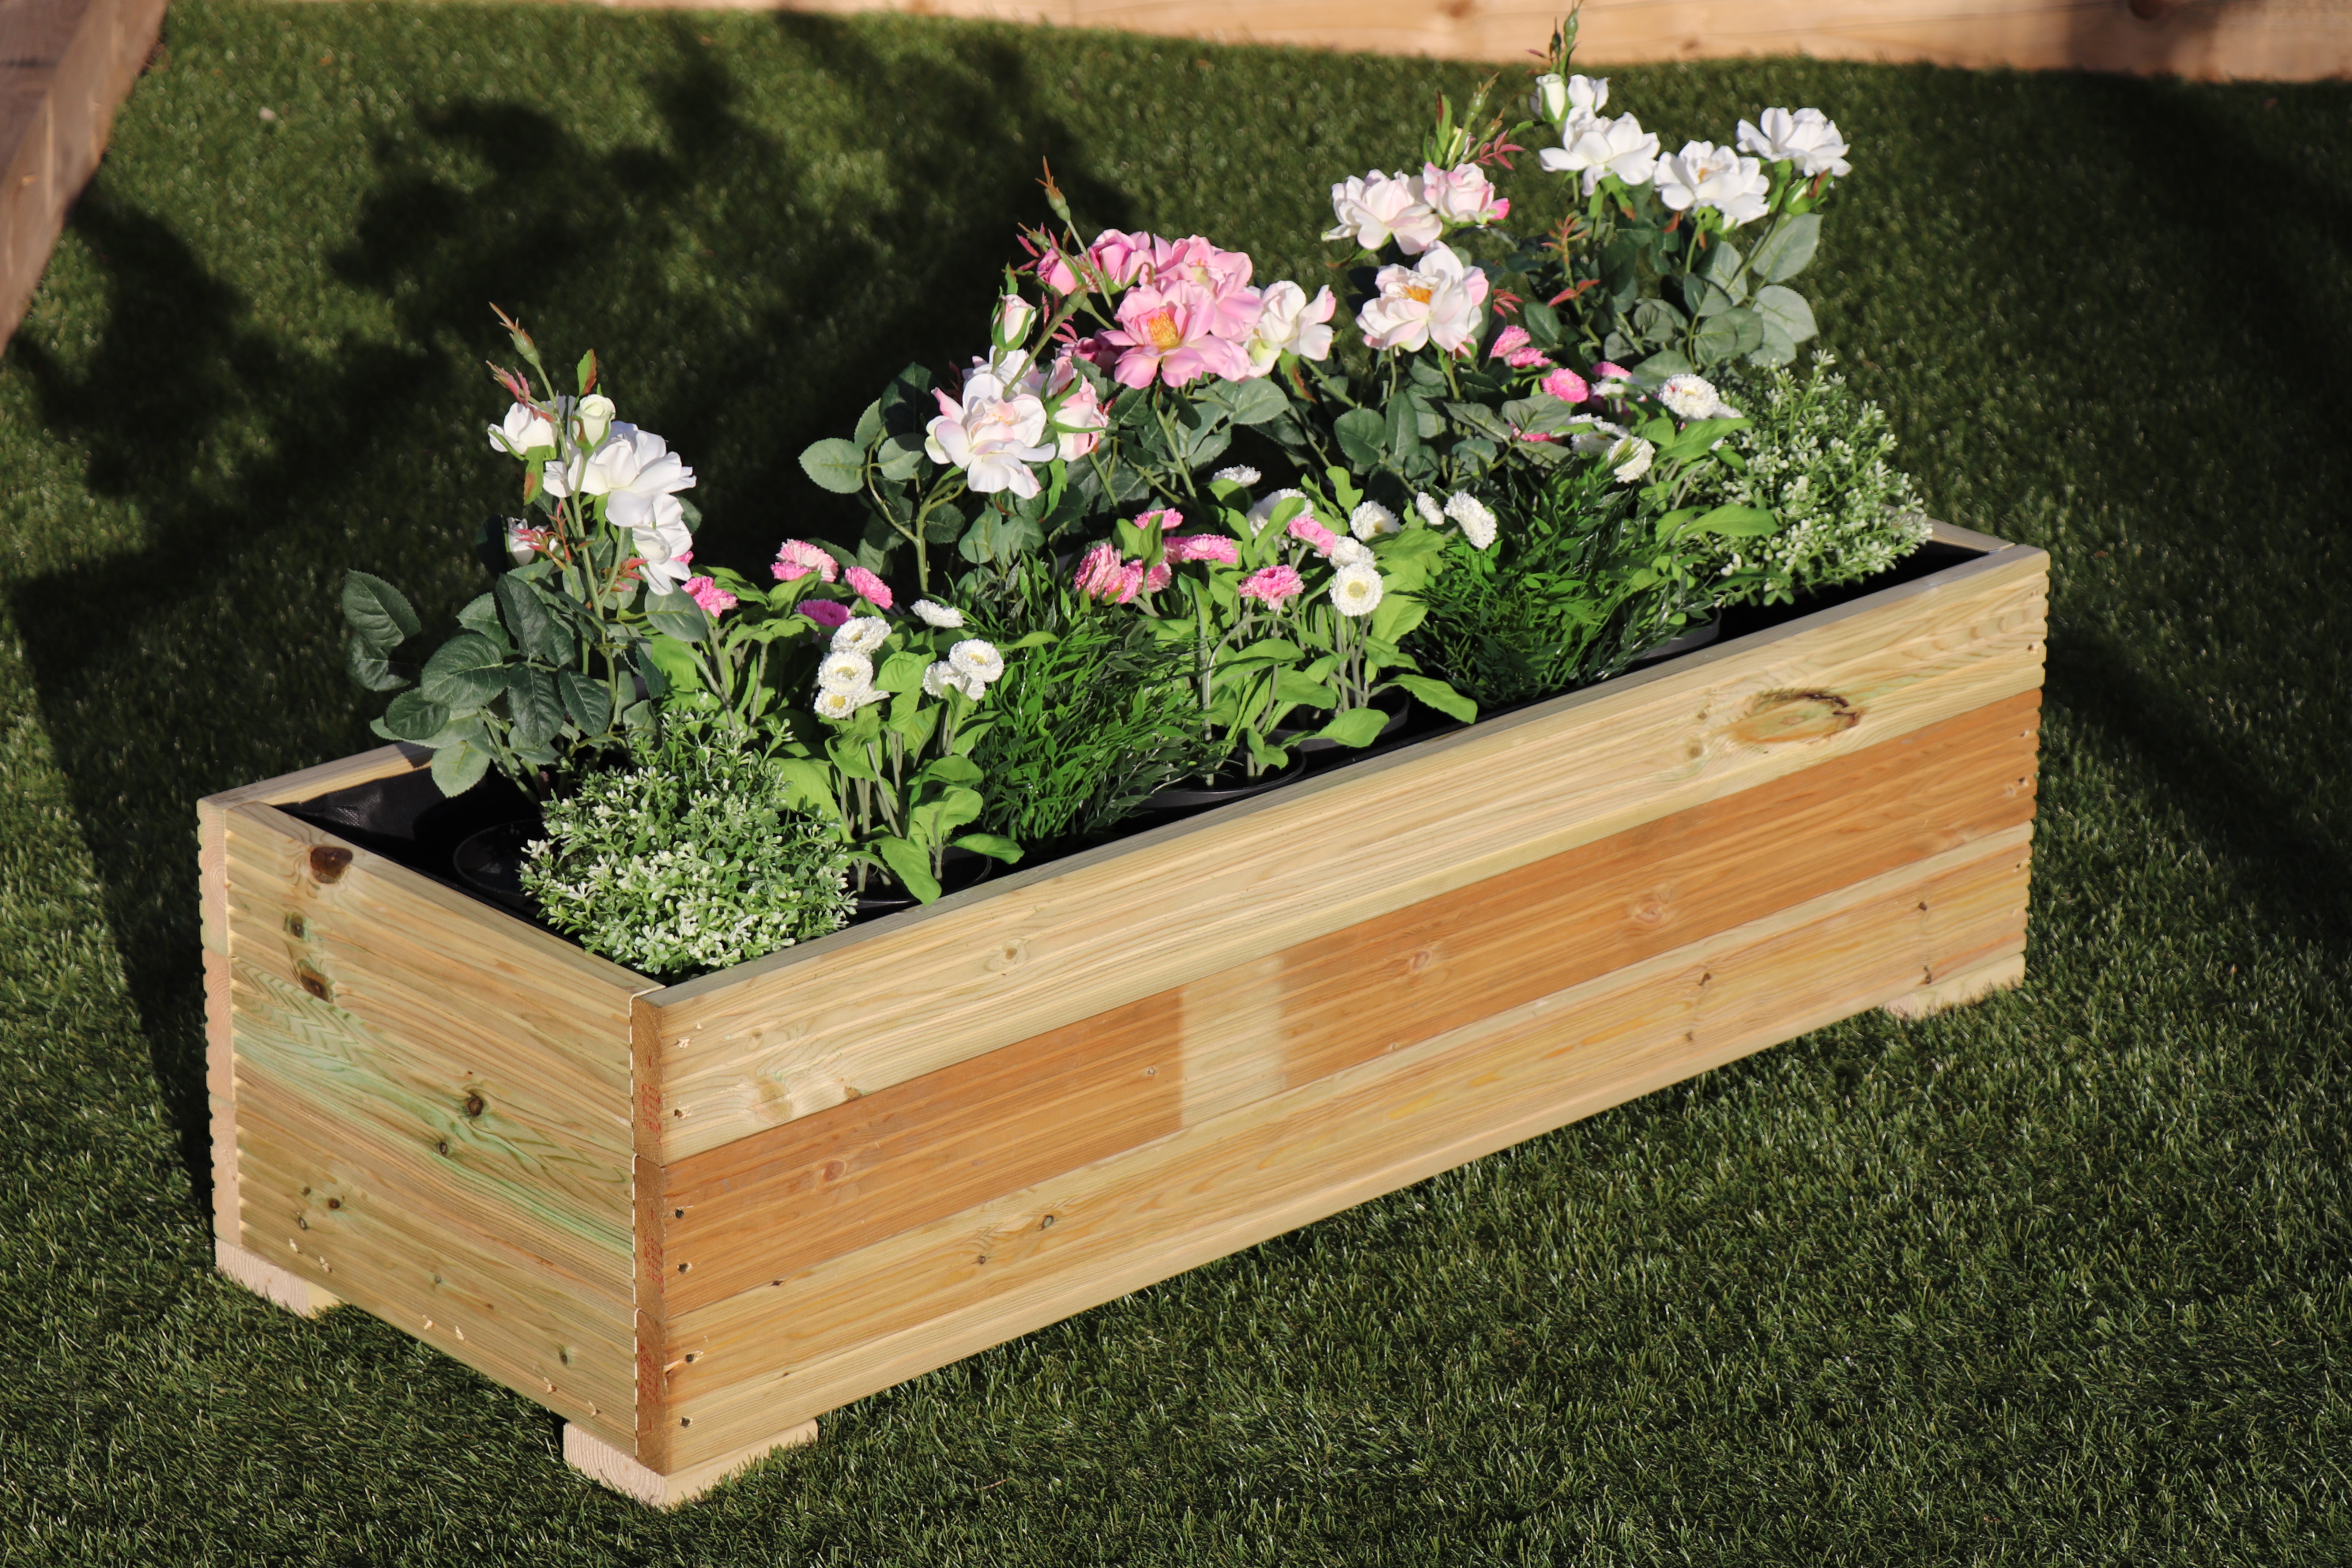 Wooden garden planters and troughs